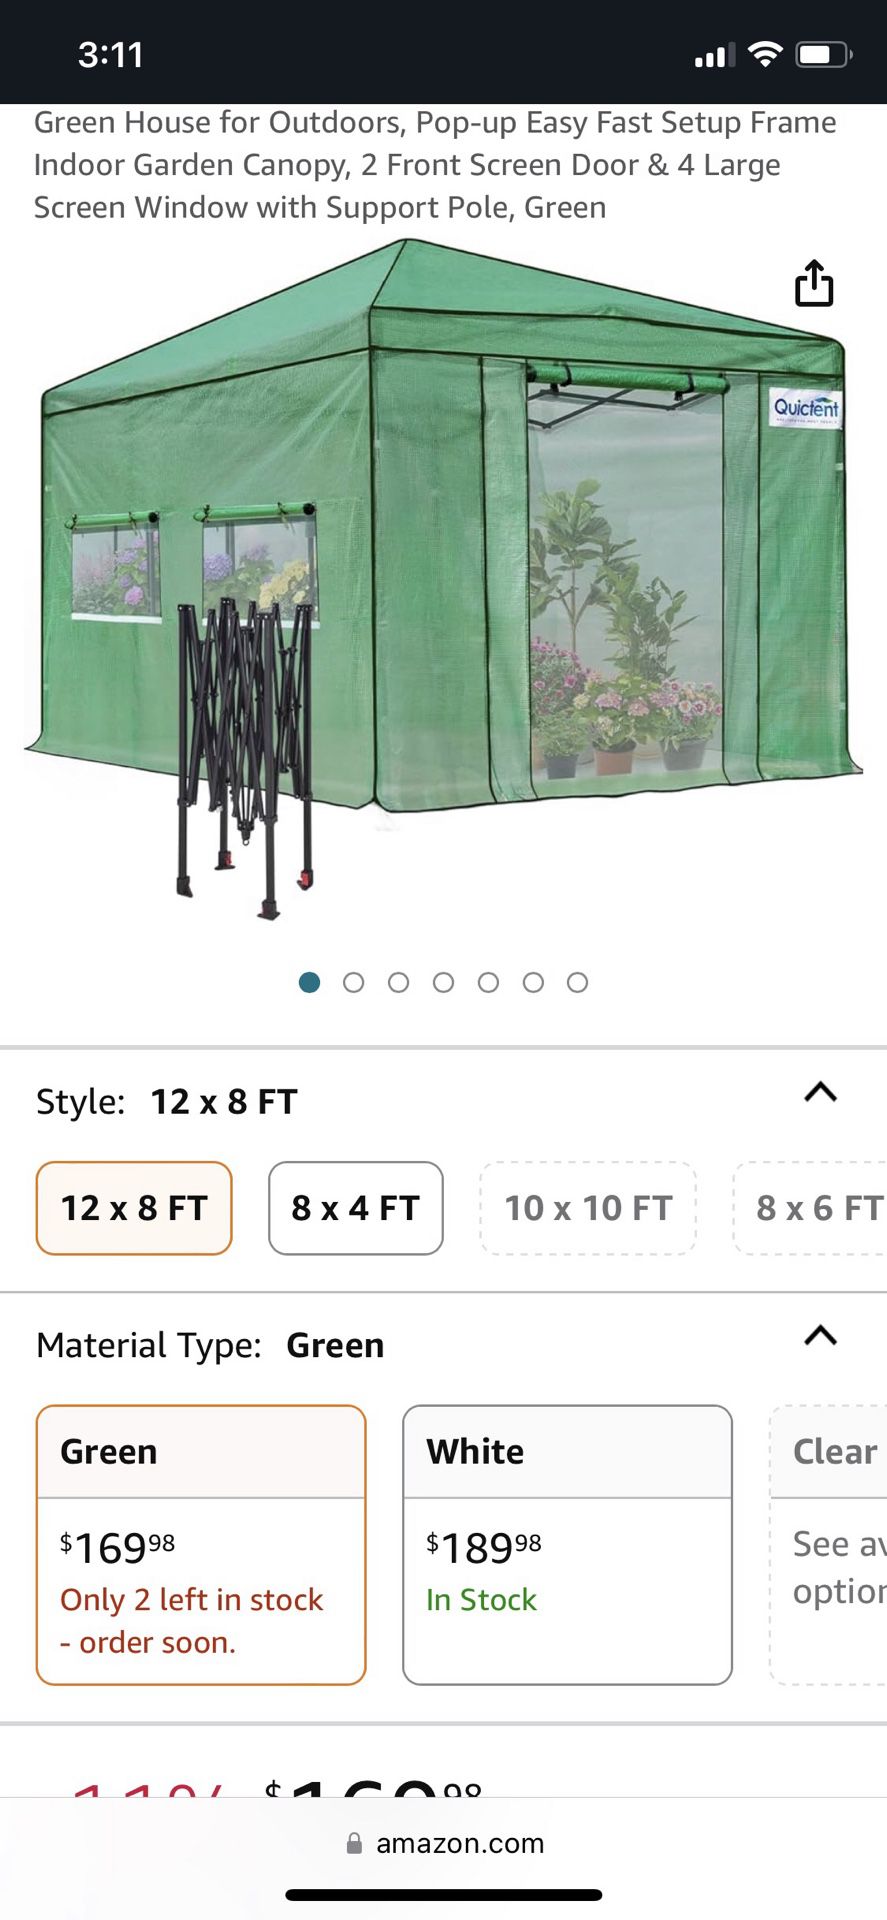 10x10ft Green House